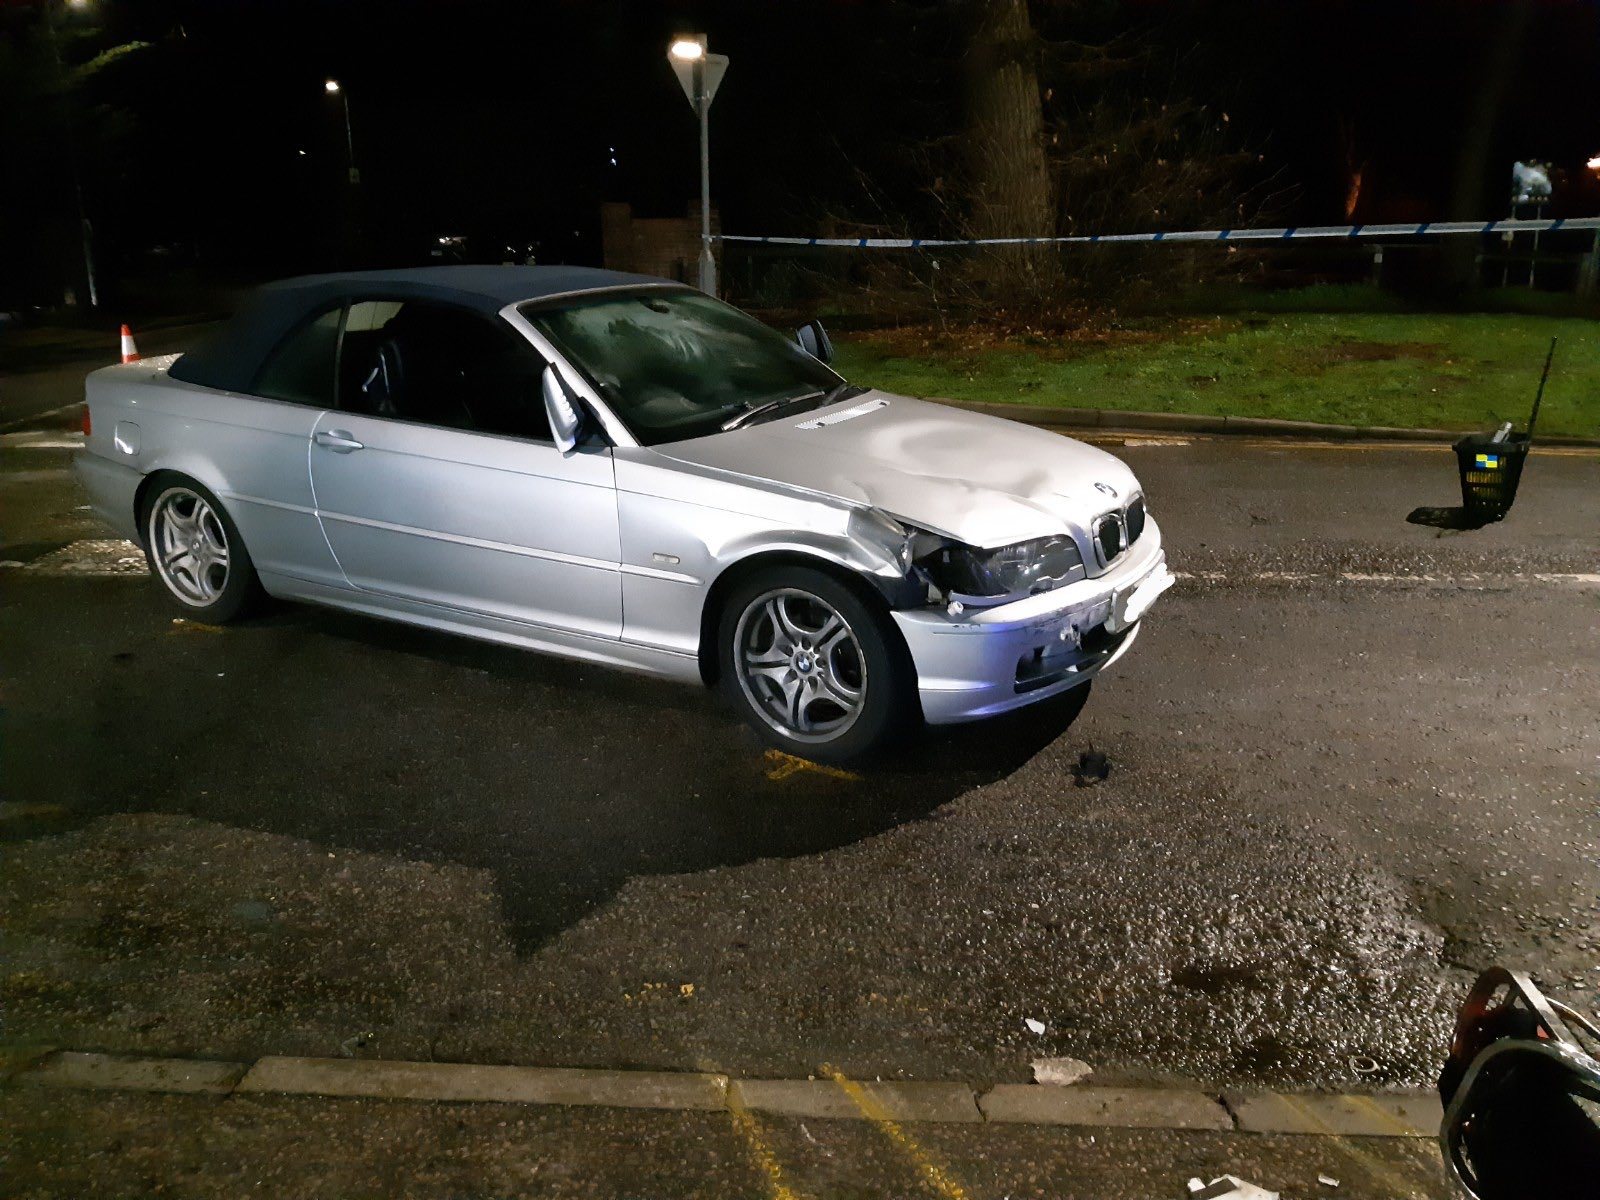 The BMW sustained damage to the front of the vehicle. Credit: BCH Road Policing Unit